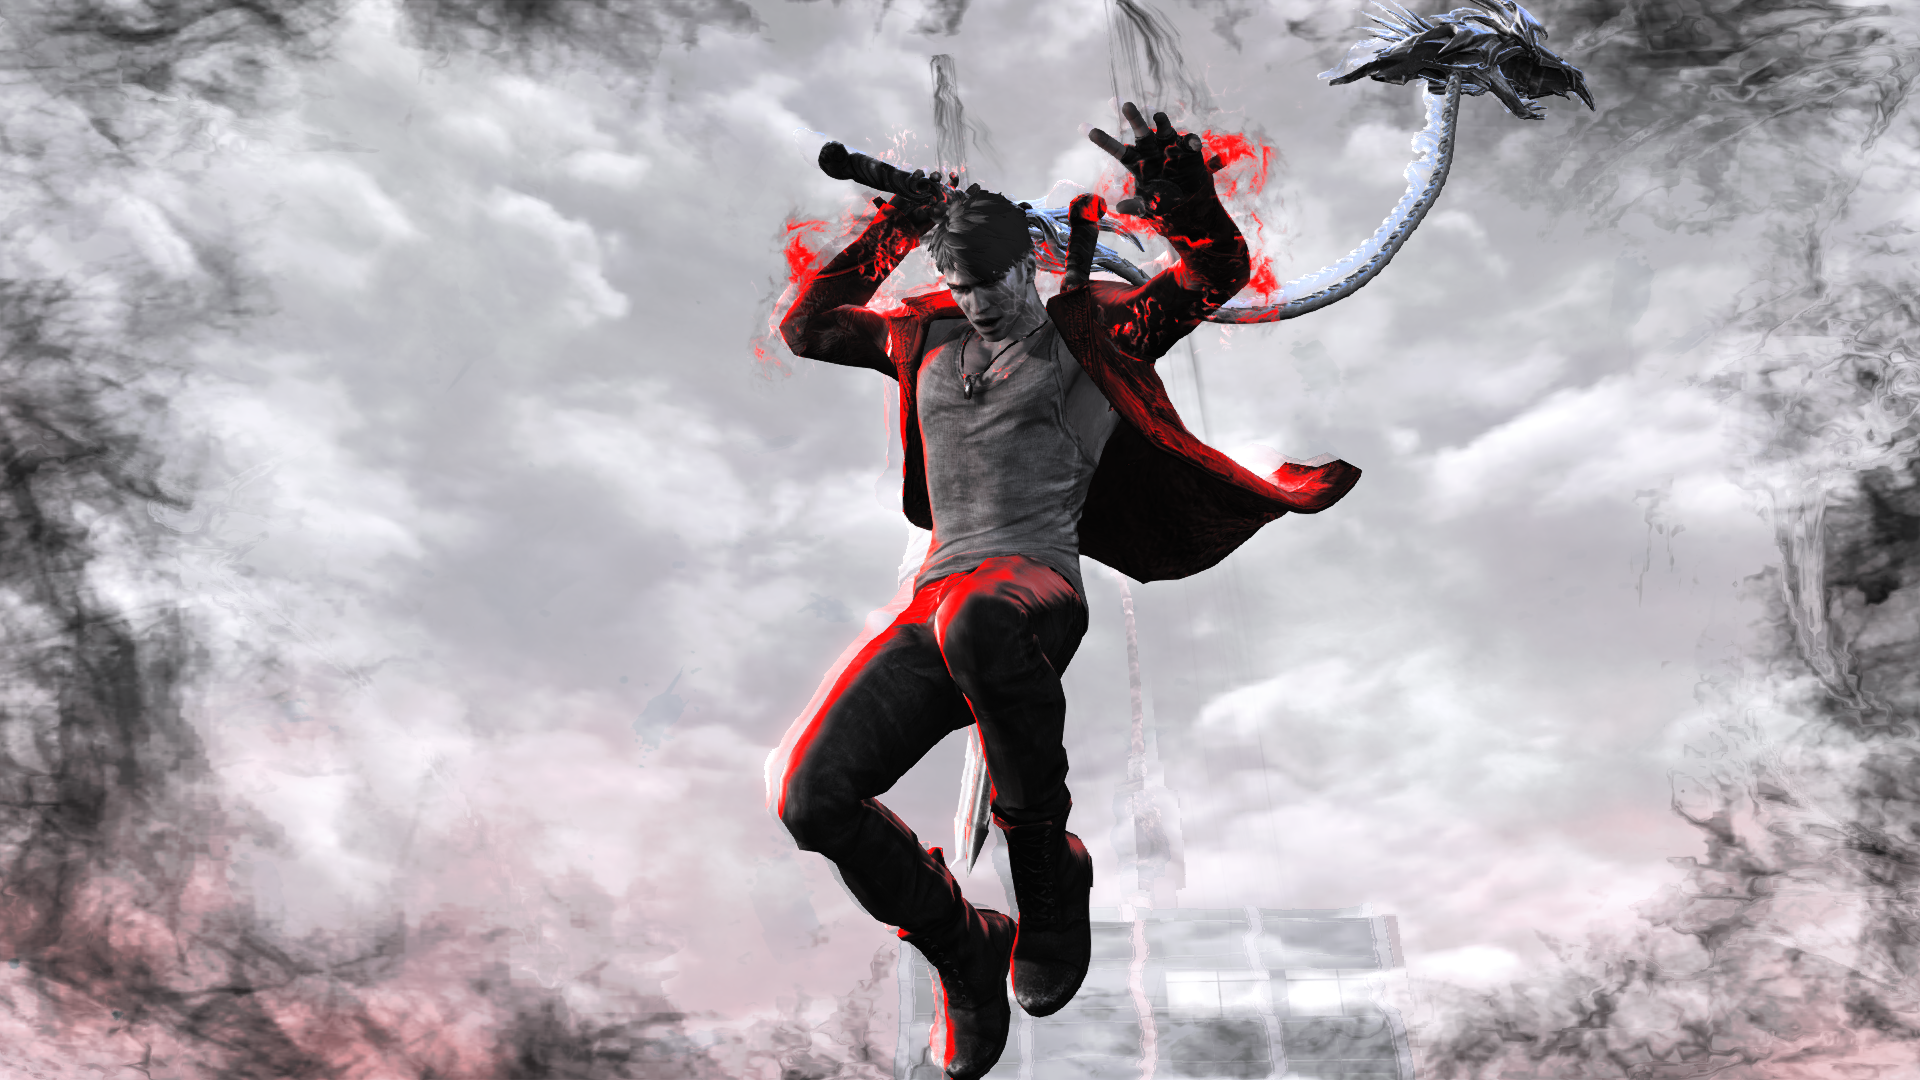 Devil May Cry 5 Wallpaper New Collection #p8v0783k – Yoanu